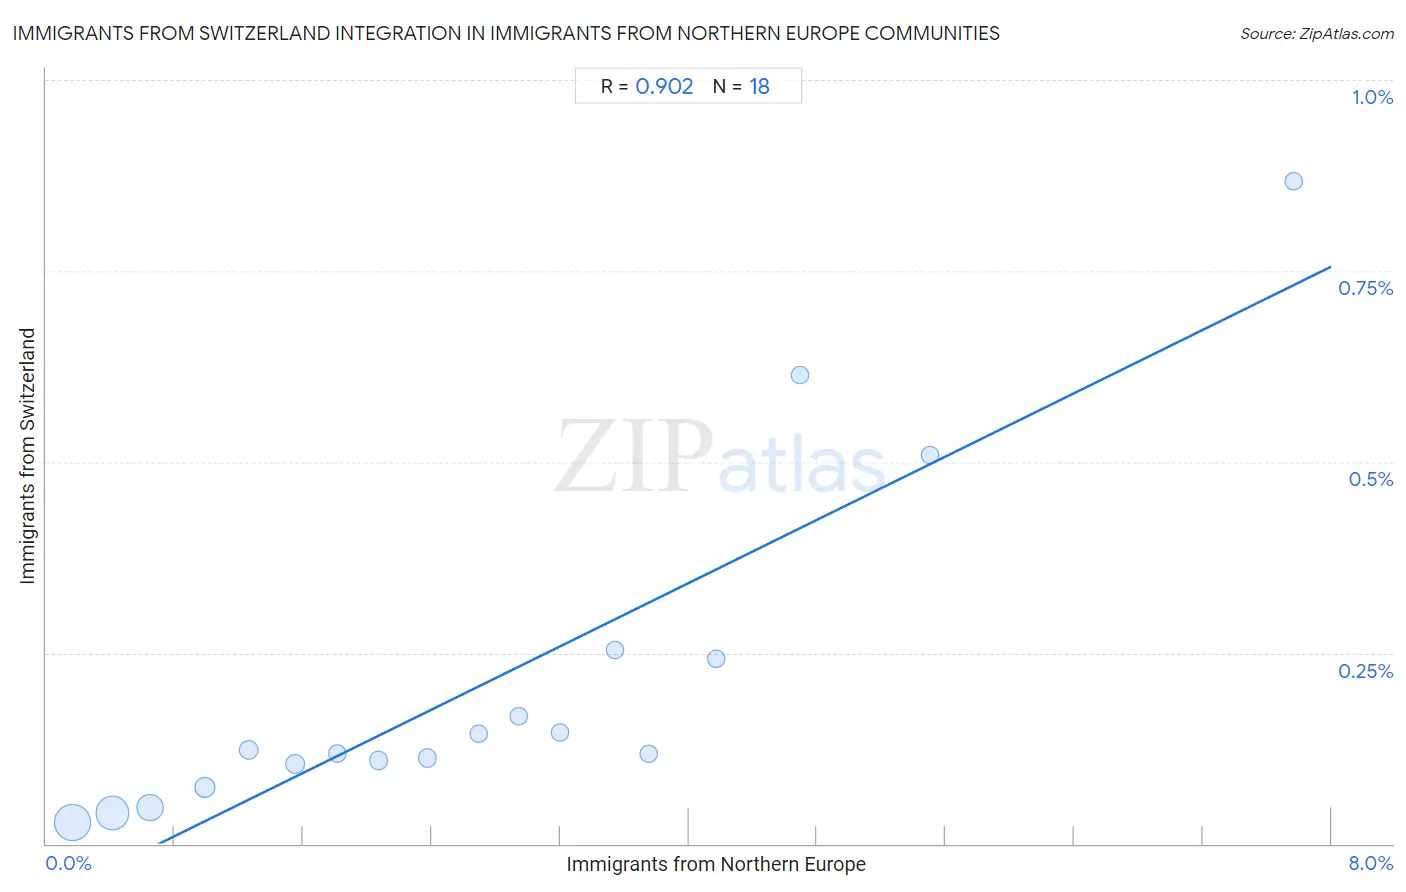 Immigrants from Northern Europe Integration in Immigrants from Switzerland Communities